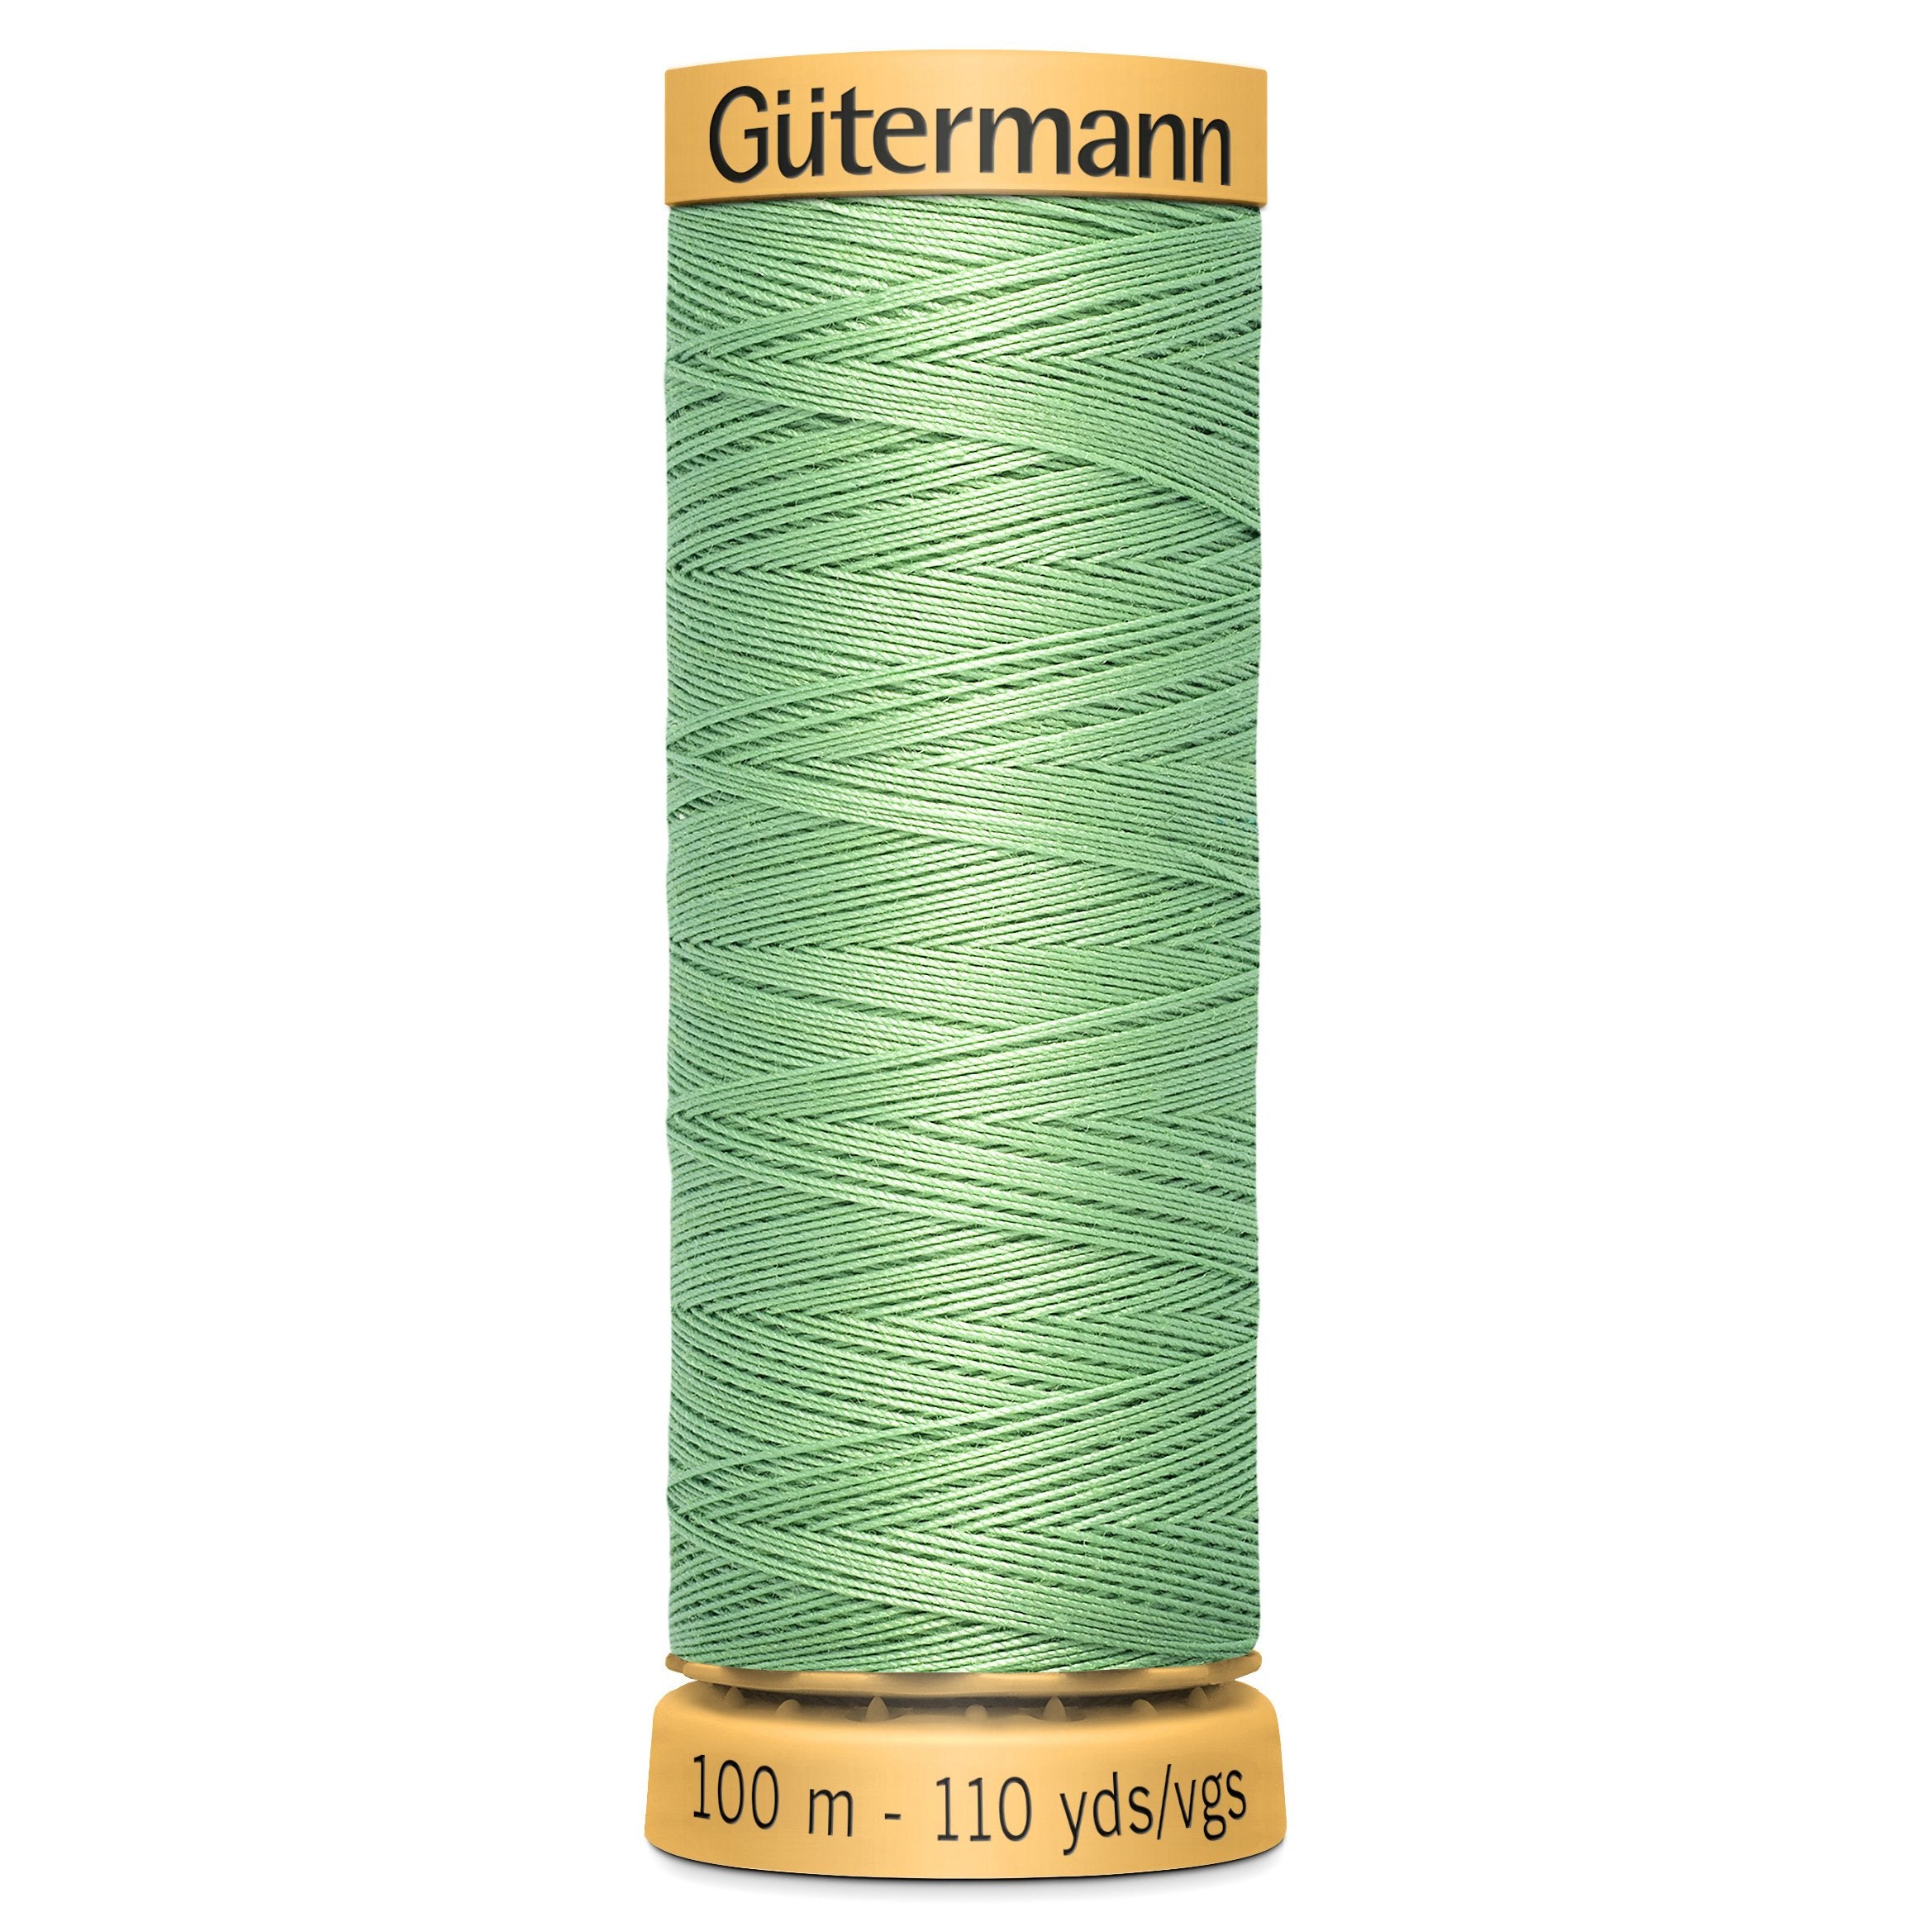 Gutermann Natural Cotton - 7880 from Jaycotts Sewing Supplies